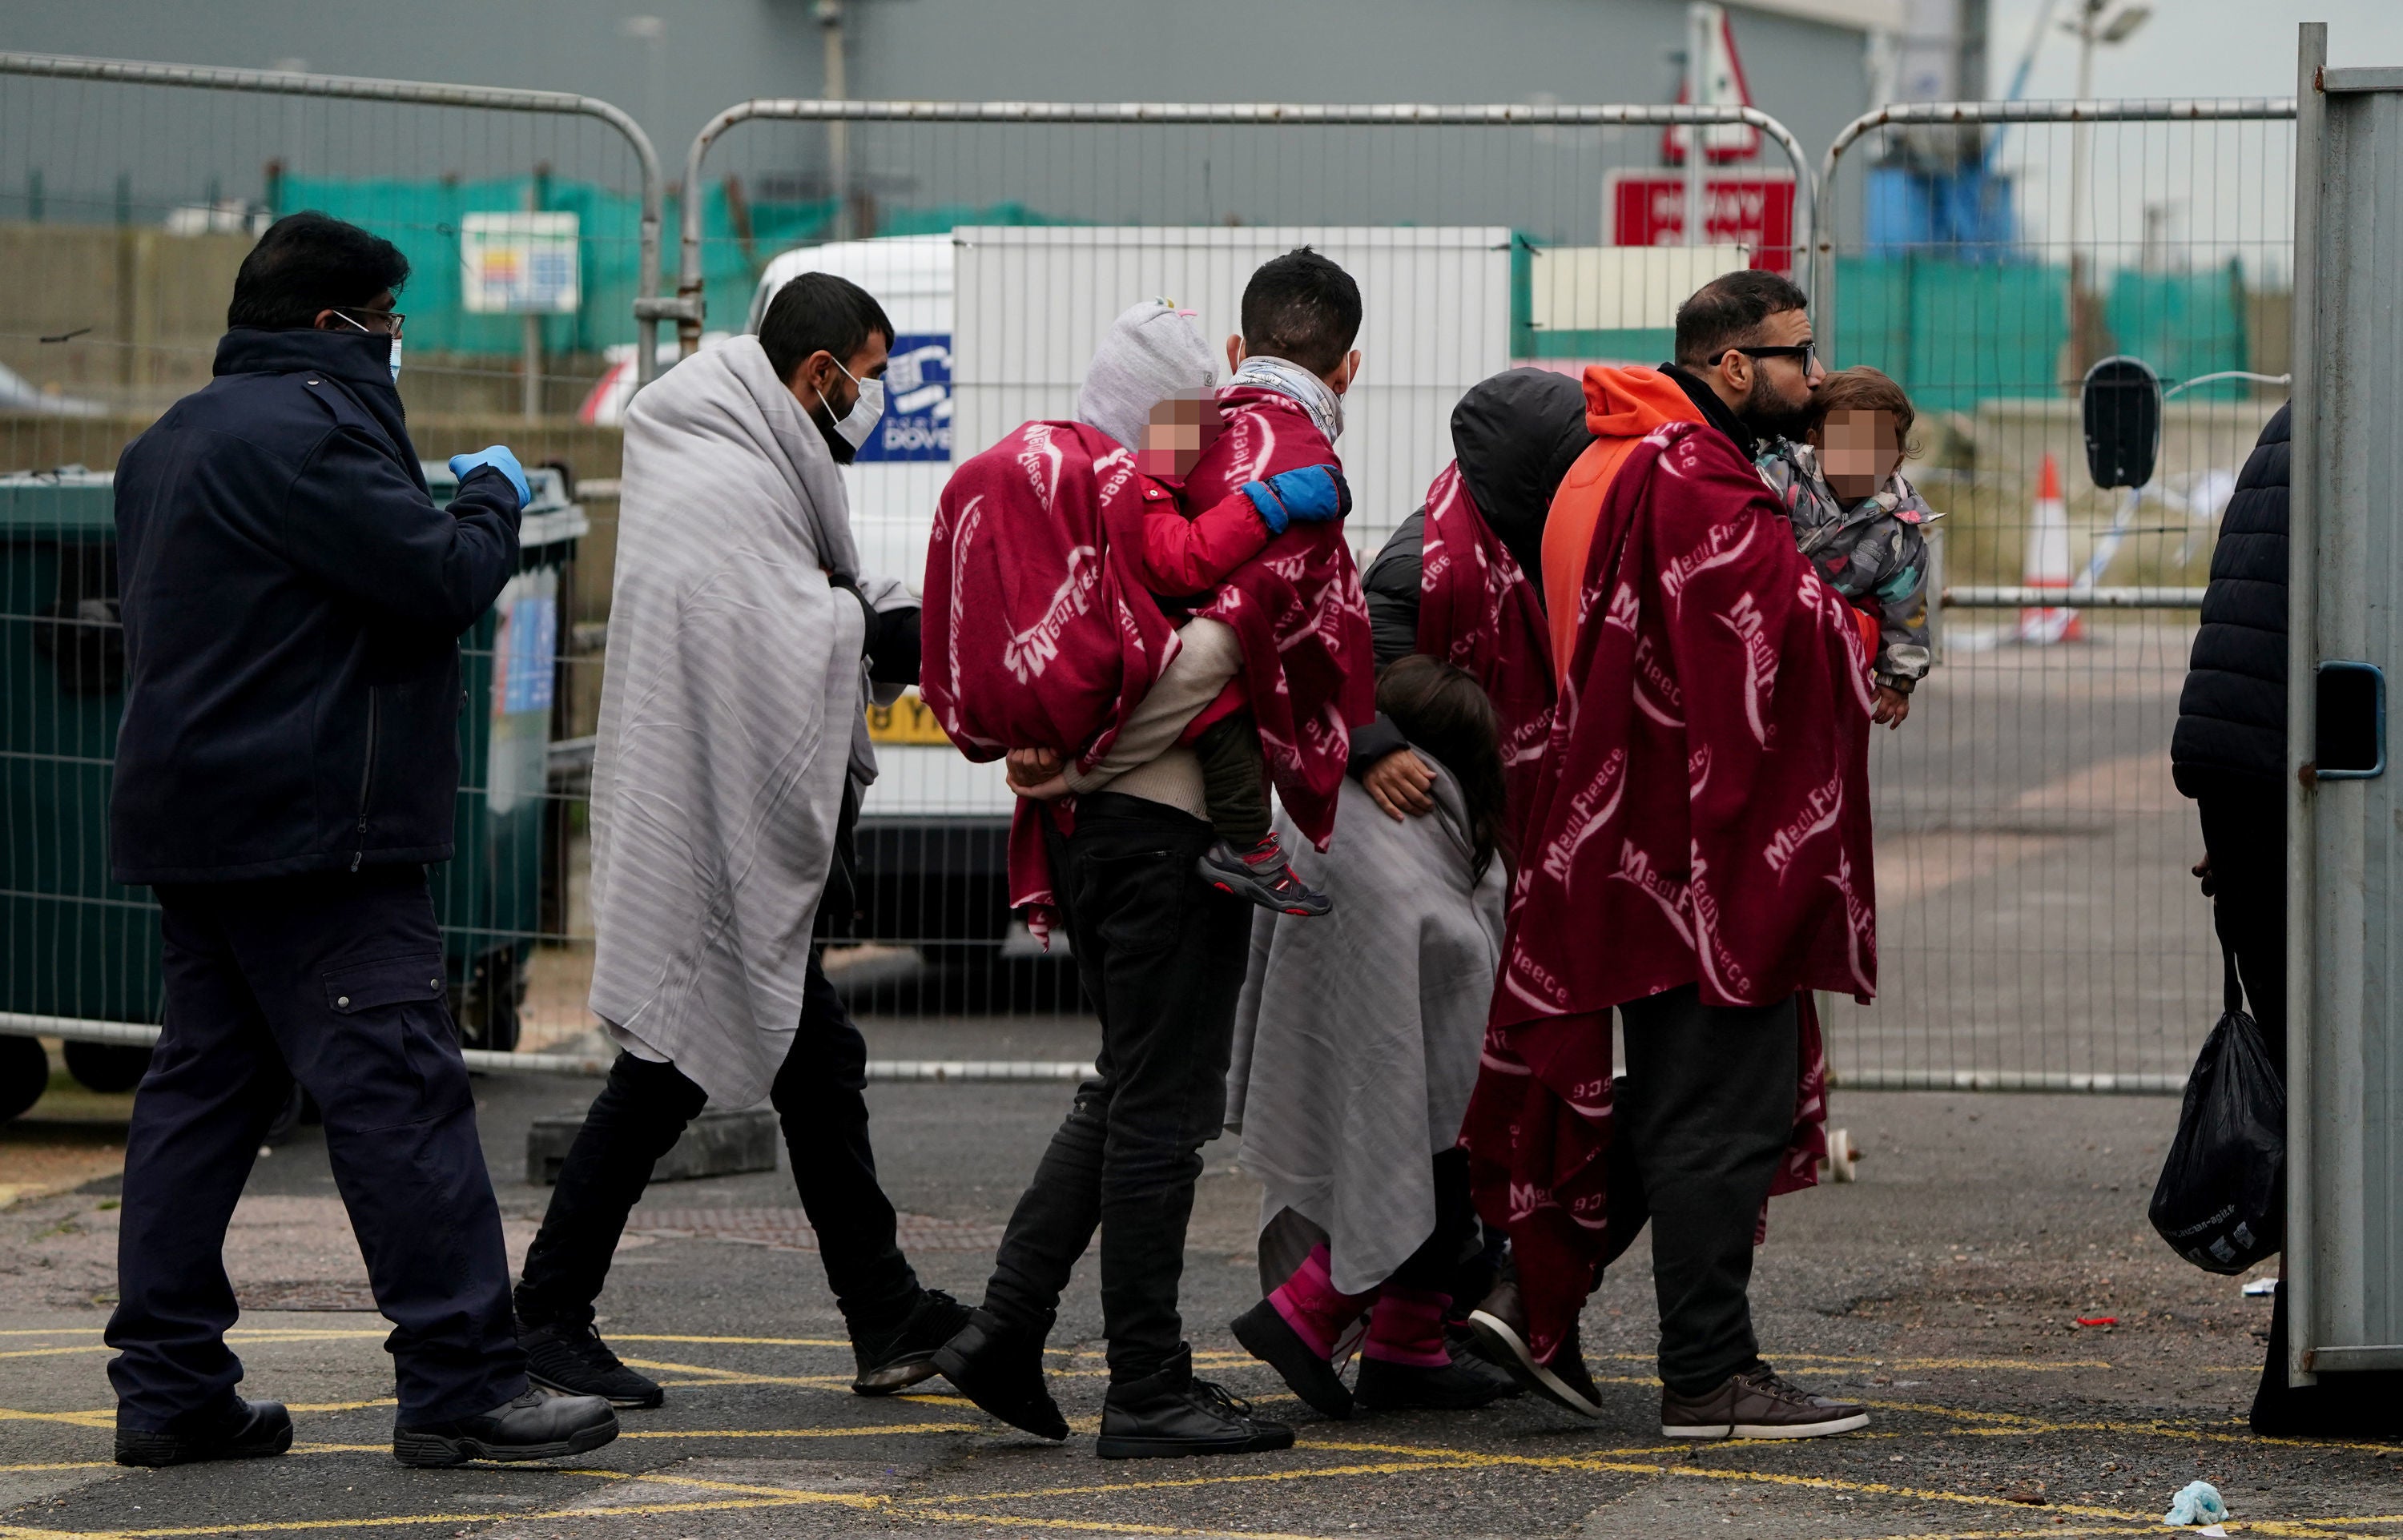 A group of people thought to be migrants arrive in Dover, Kent, in November, after being rescued by the Dover lifeboat